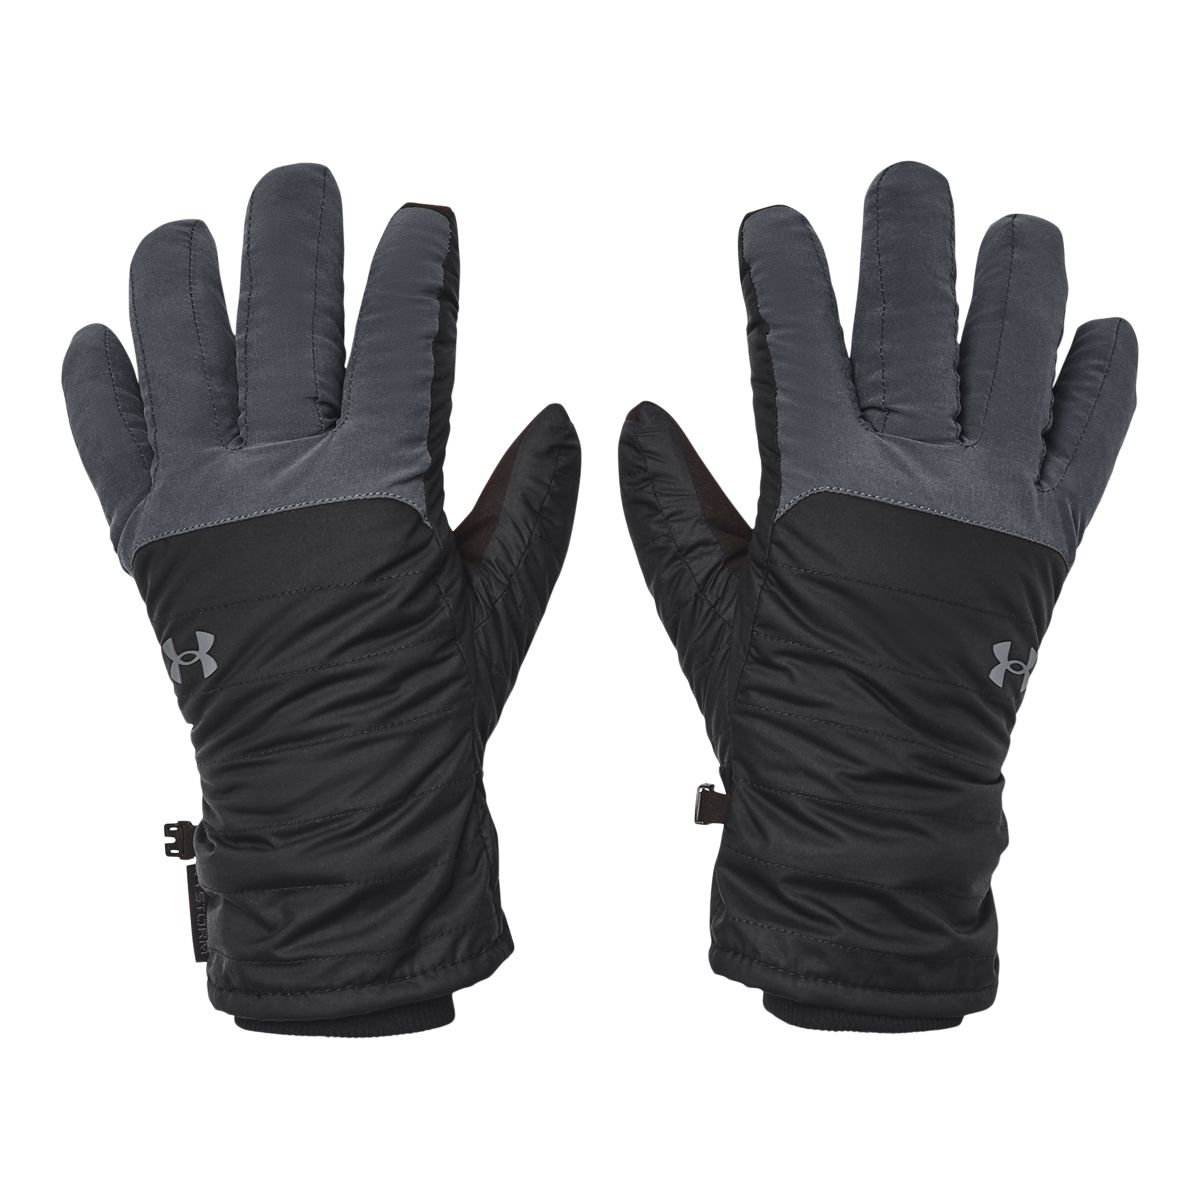 Under Armour Men's ColdGear® Infrared® Storm Insulated Gloves